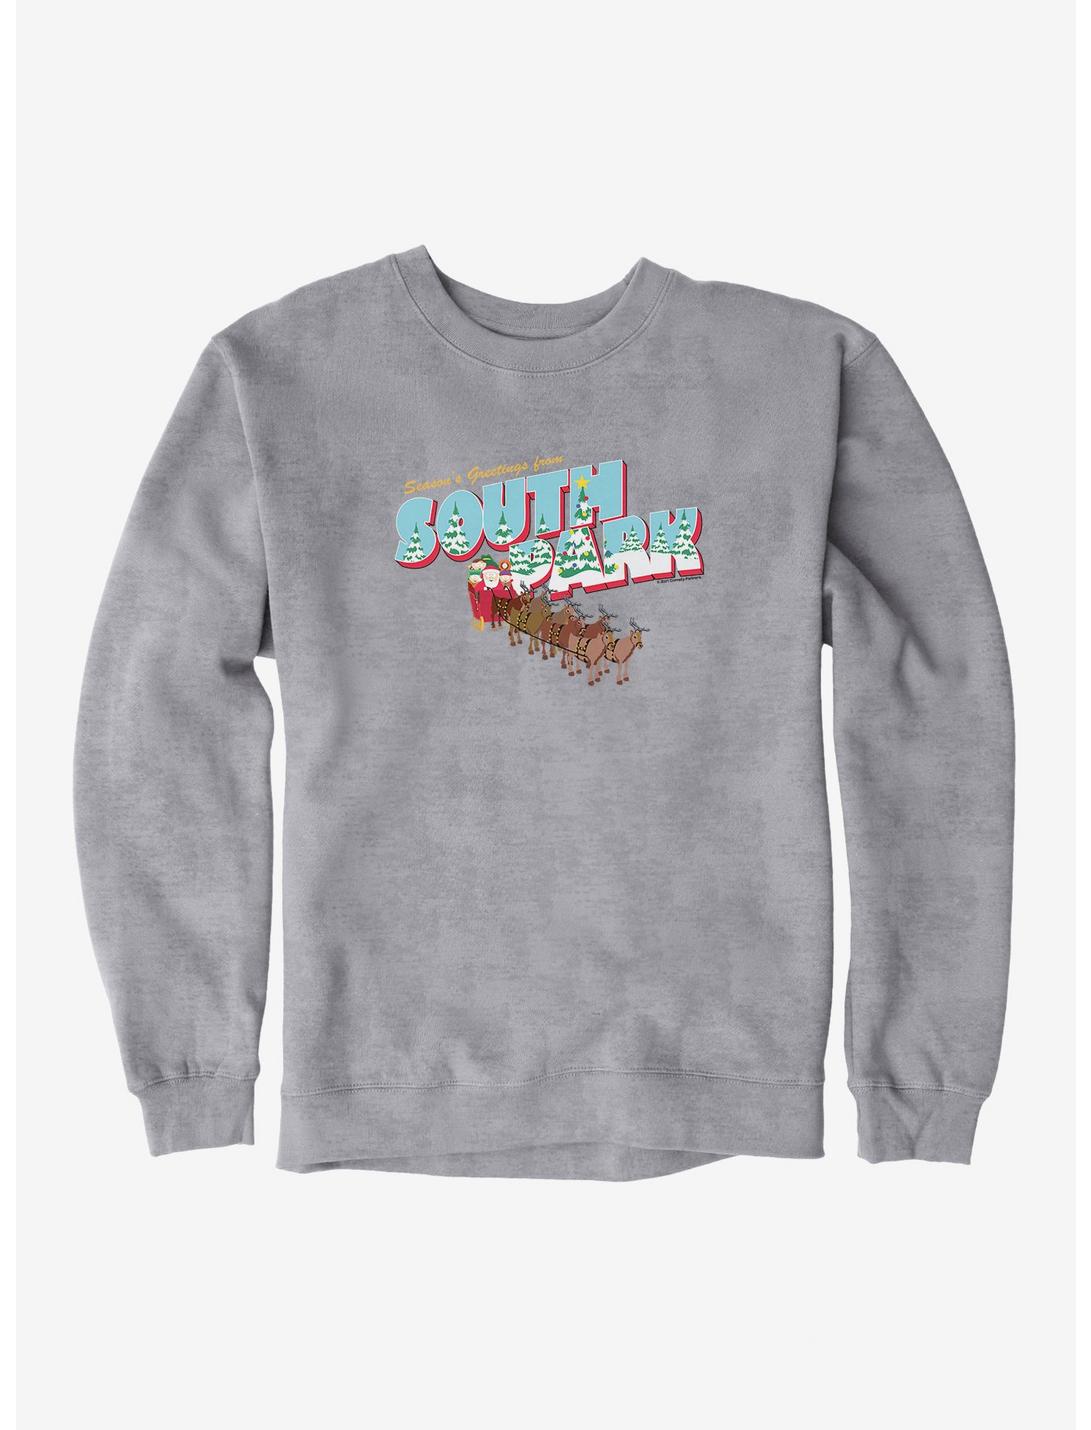 South Park Christmas Guide On the Roof Sweatshirt, , hi-res